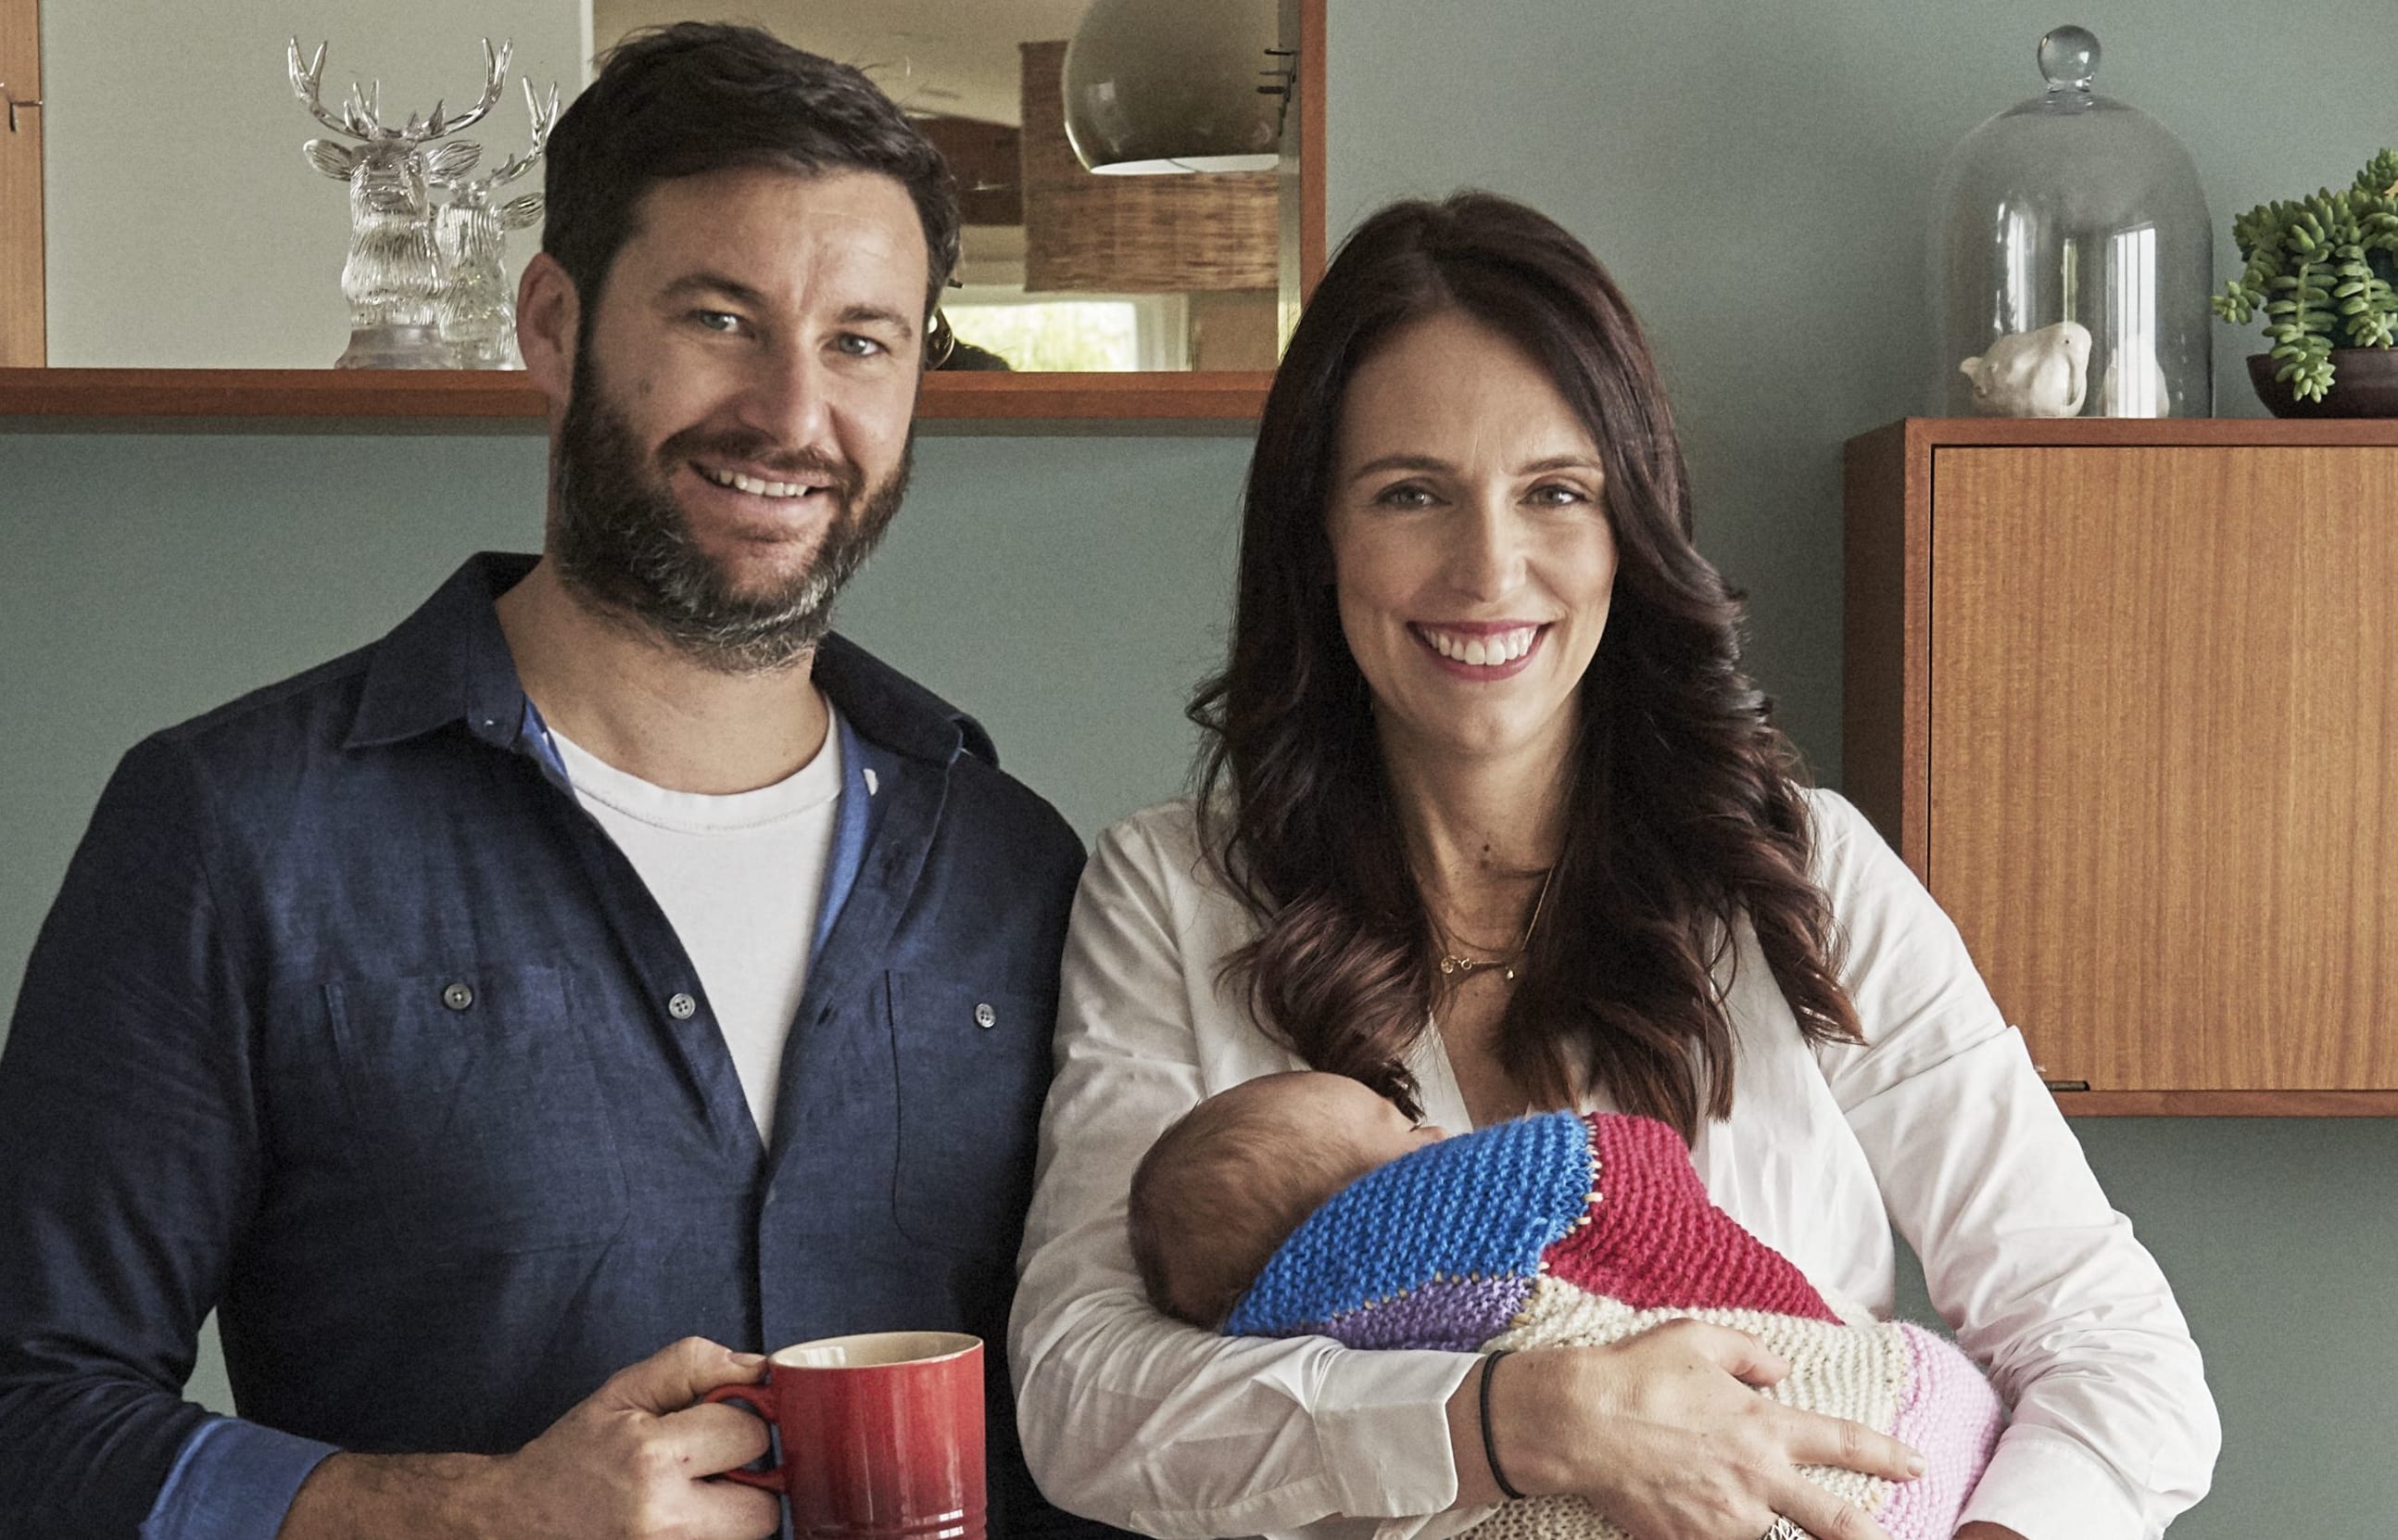 Prime Minister Jacinda Ardern with her partner Clarke Gayford and their child Neve in the Auckland home.